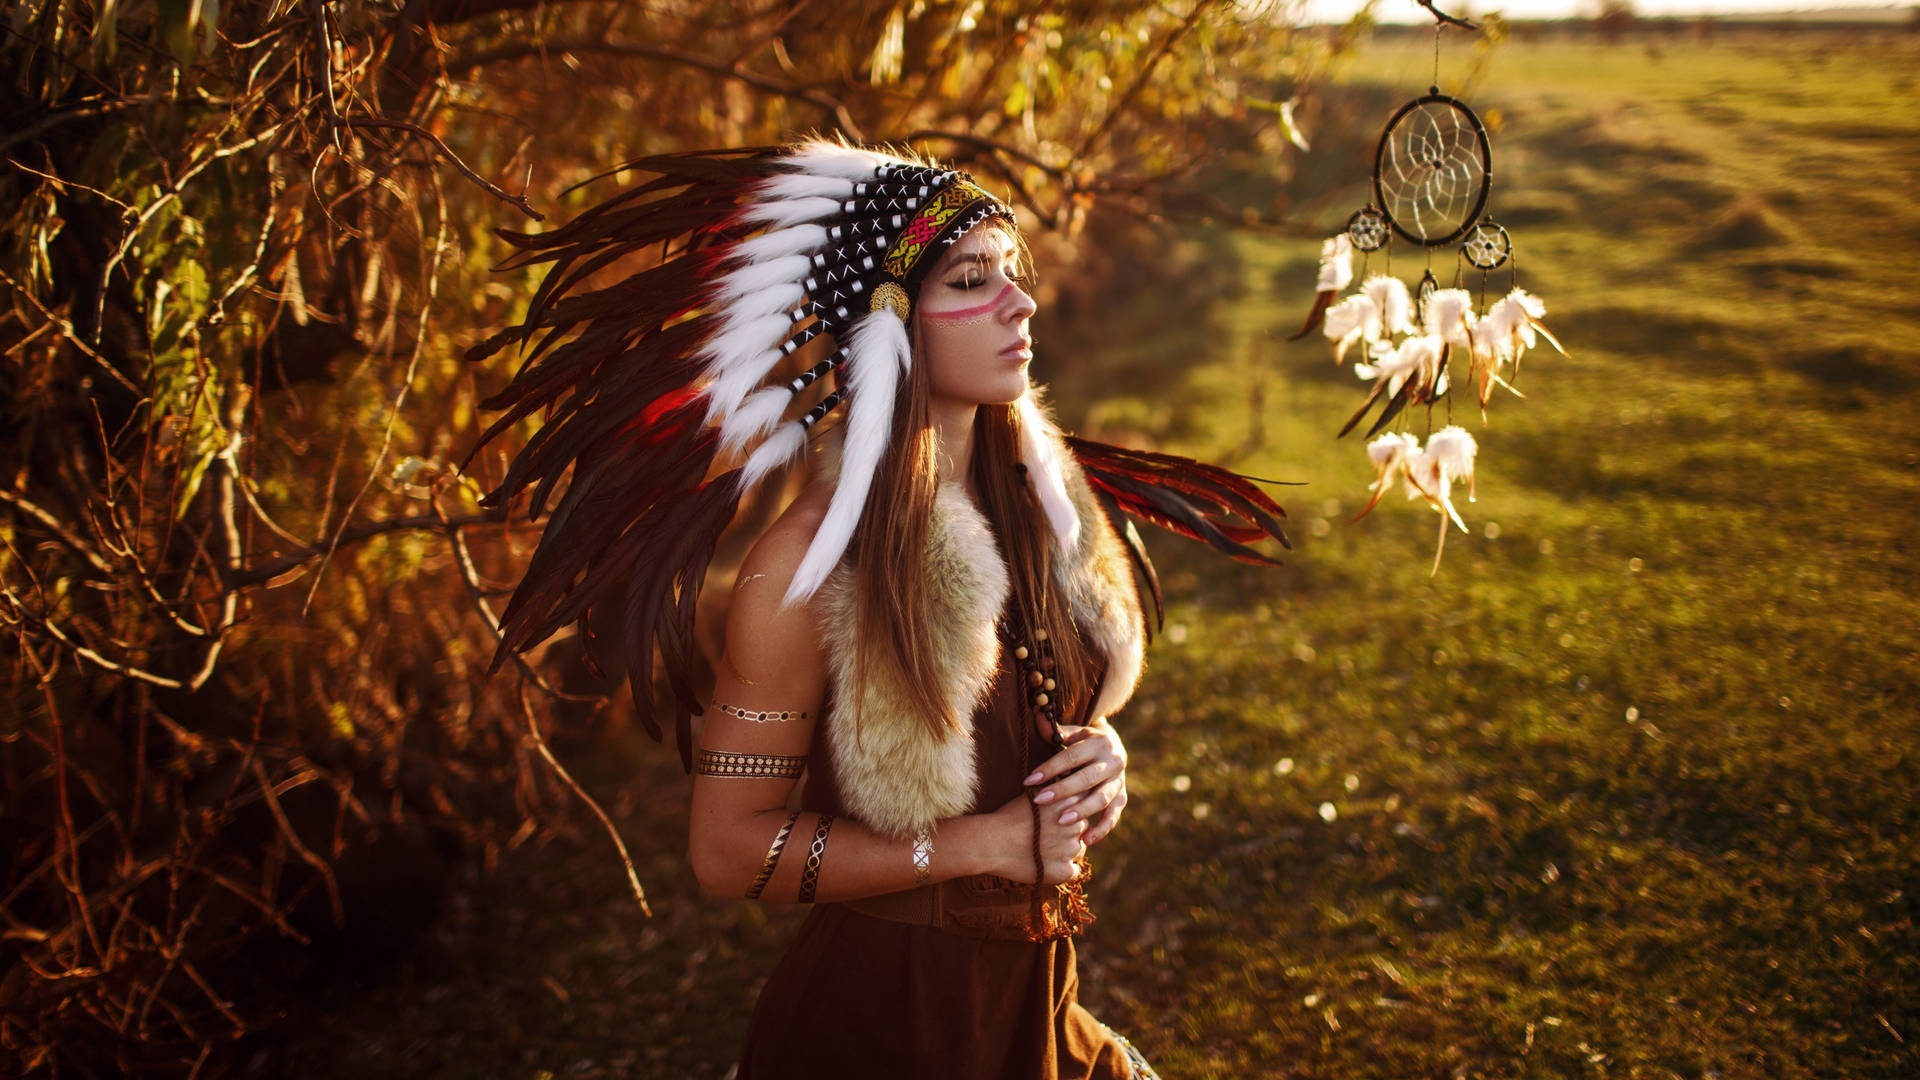 Woman In Indigenous Feathered Costume Wallpaper